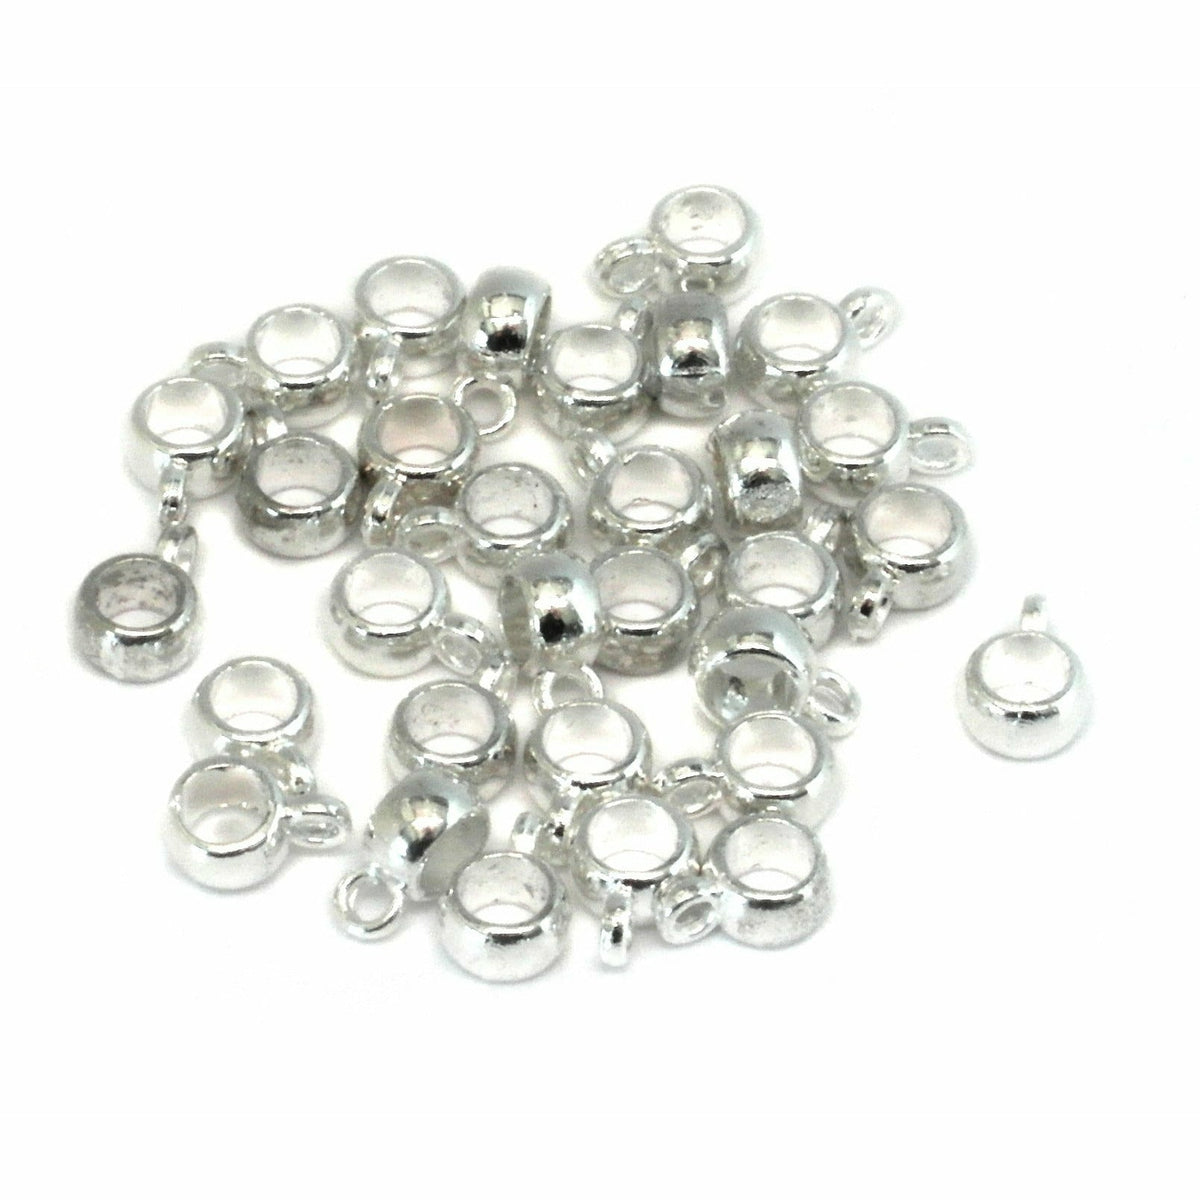 3D Nail Art Bling Rhinestones Metal Rivet Beads Studs For DIY Decoration In  Mixed Sizes From Boyyt, $21.54